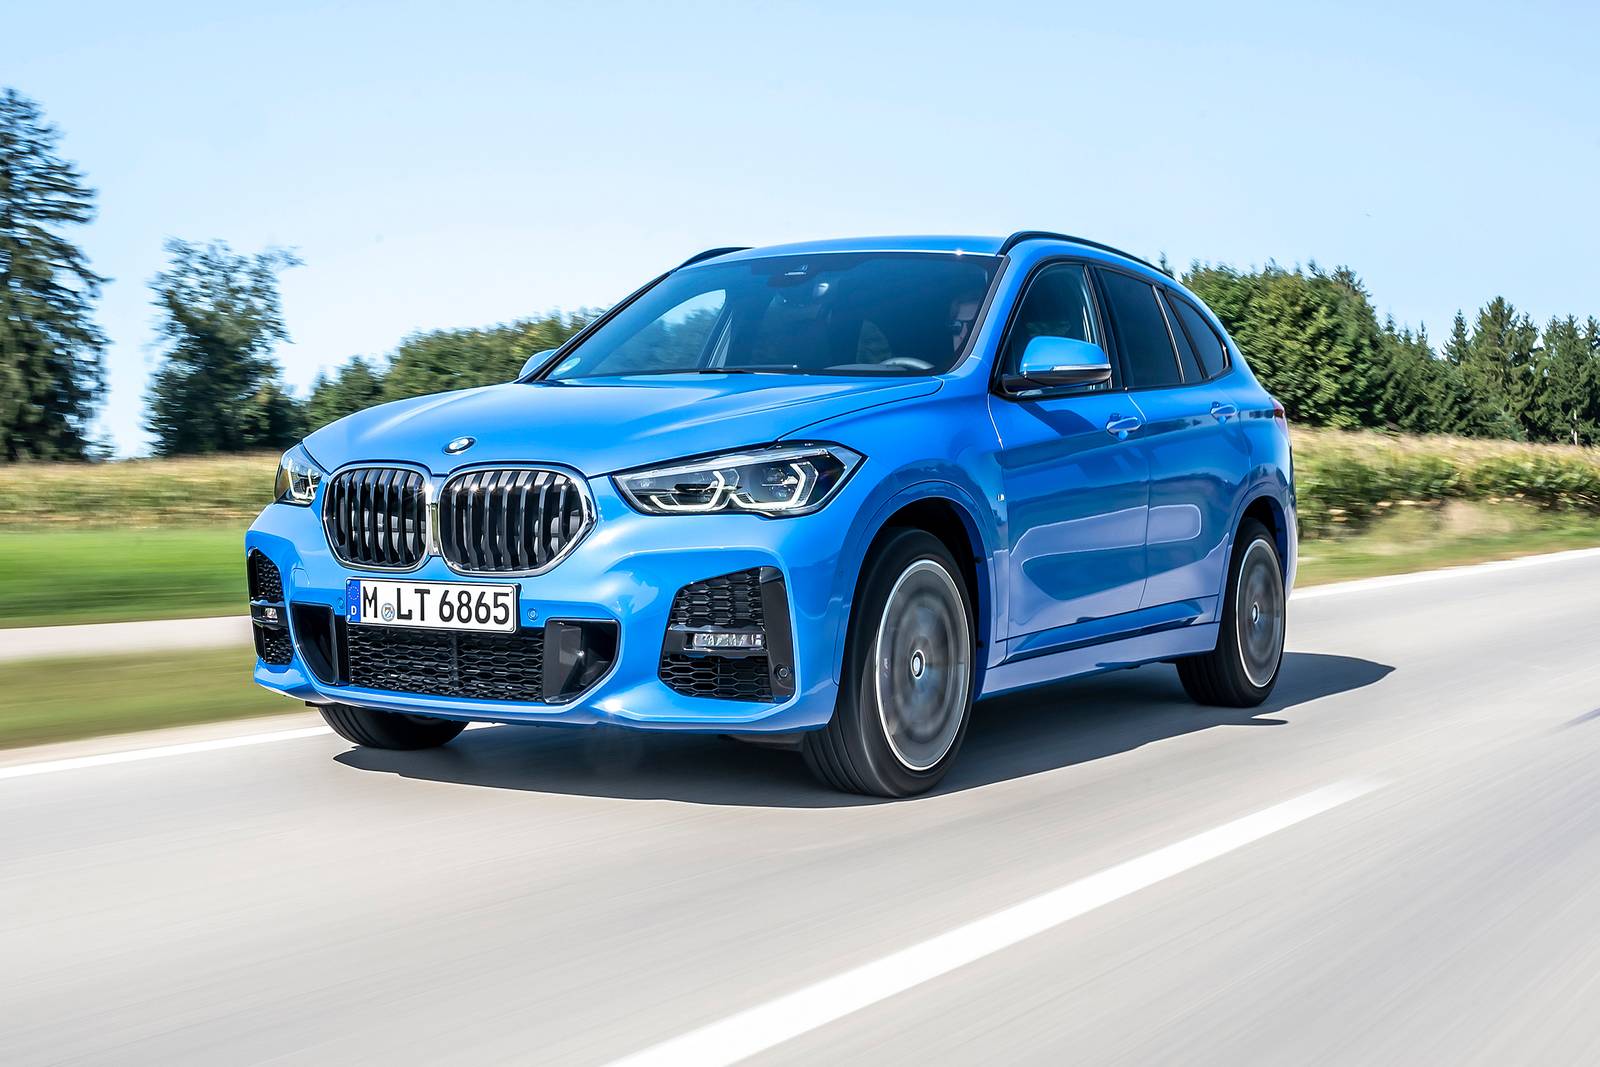 38 HQ Images Bmw X1 M Sport Package - 2021 Bmw X1 Prices Reviews And